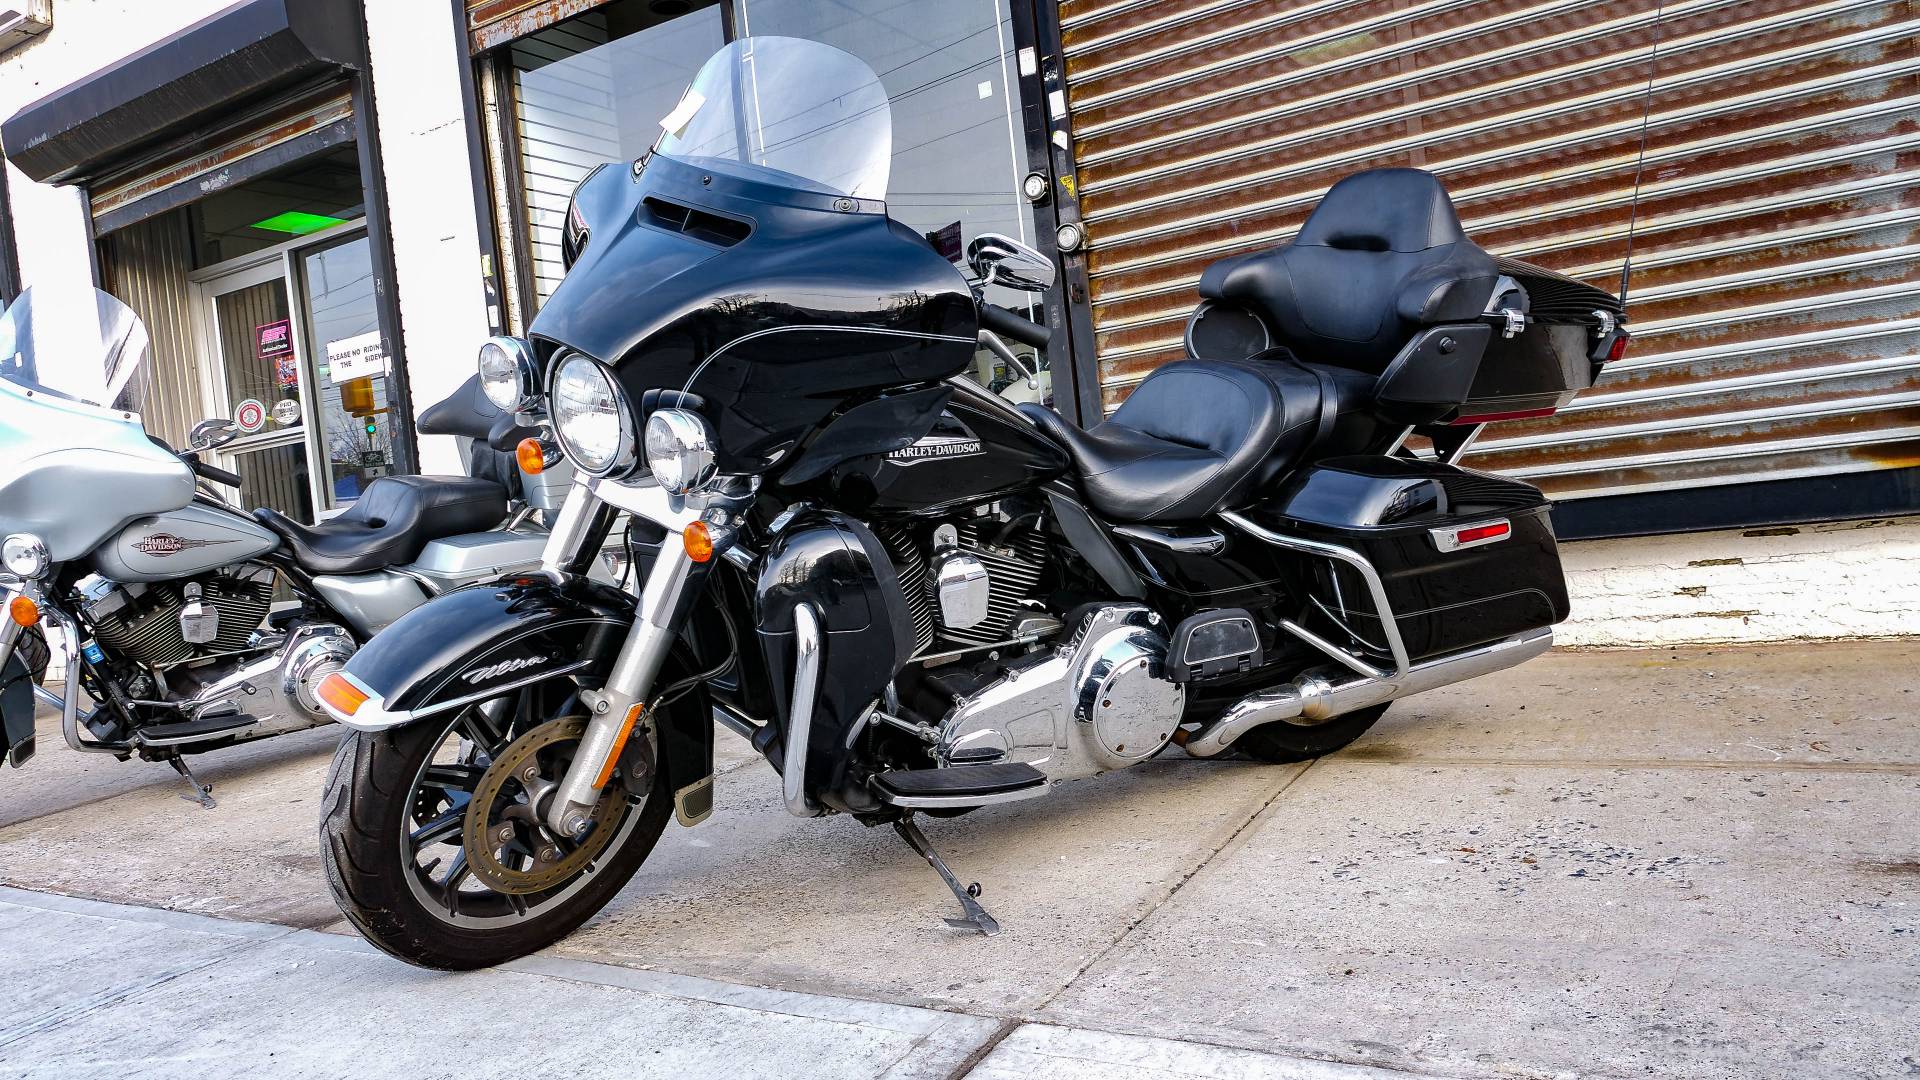 Used 2014 Harley Davidson Electra Glide Ultra Classic Motorcycles In Oakdale Ny Stock Number Um Eb602116